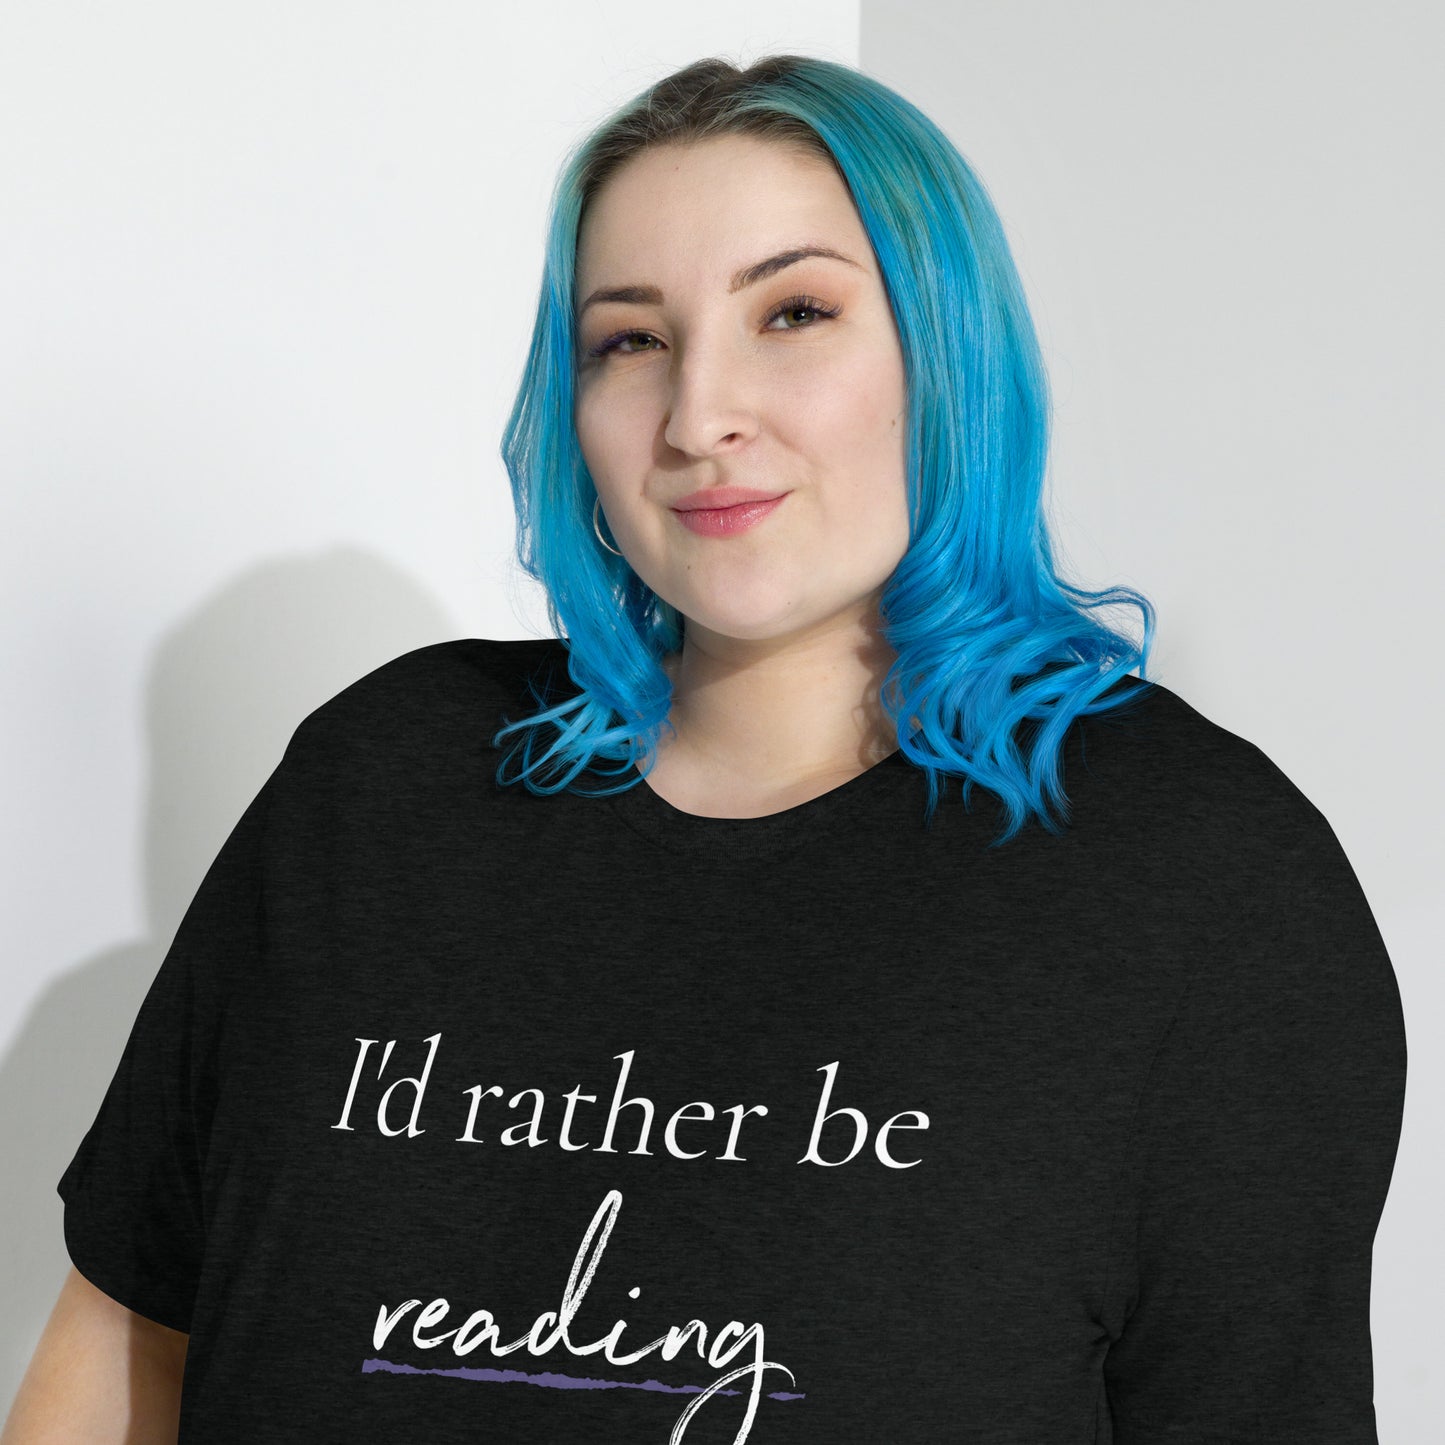 I'd rather be reading ... T-Shirt